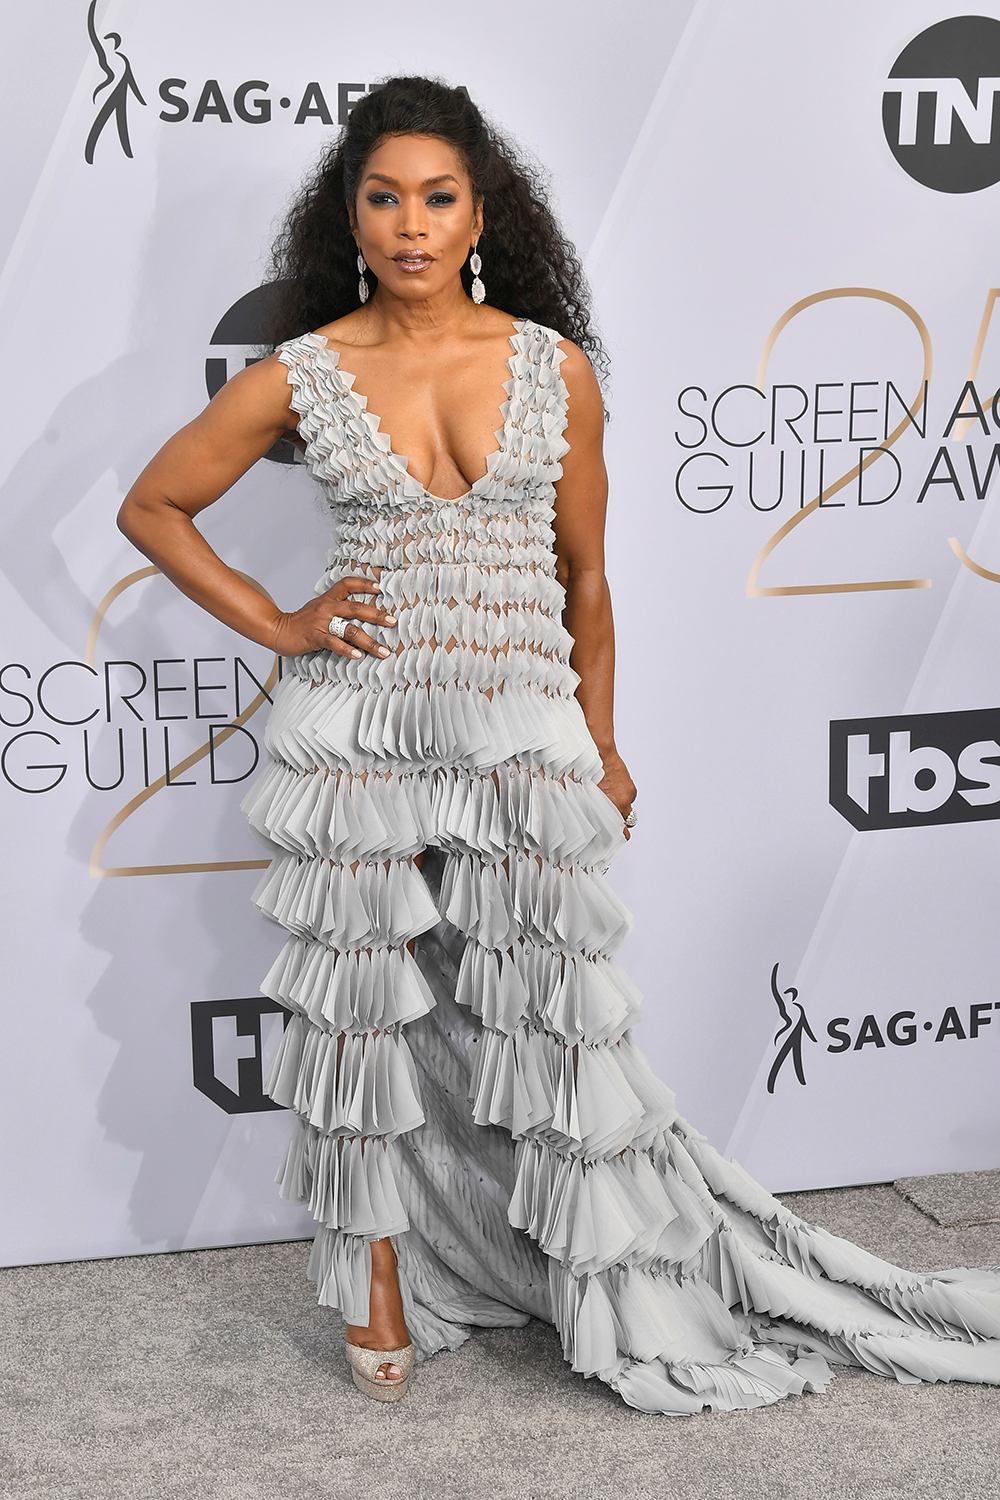 Mandatory Credit: Photo by Rob Latour/REX/Shutterstock (10072501fv) Angela Bassett 25th Annual Screen Actors Guild Awards, Arrivals, Los Angeles, USA - 27 Jan 2019 Wearing Georges Chakra Same Outfit as catwalk model *9734905t